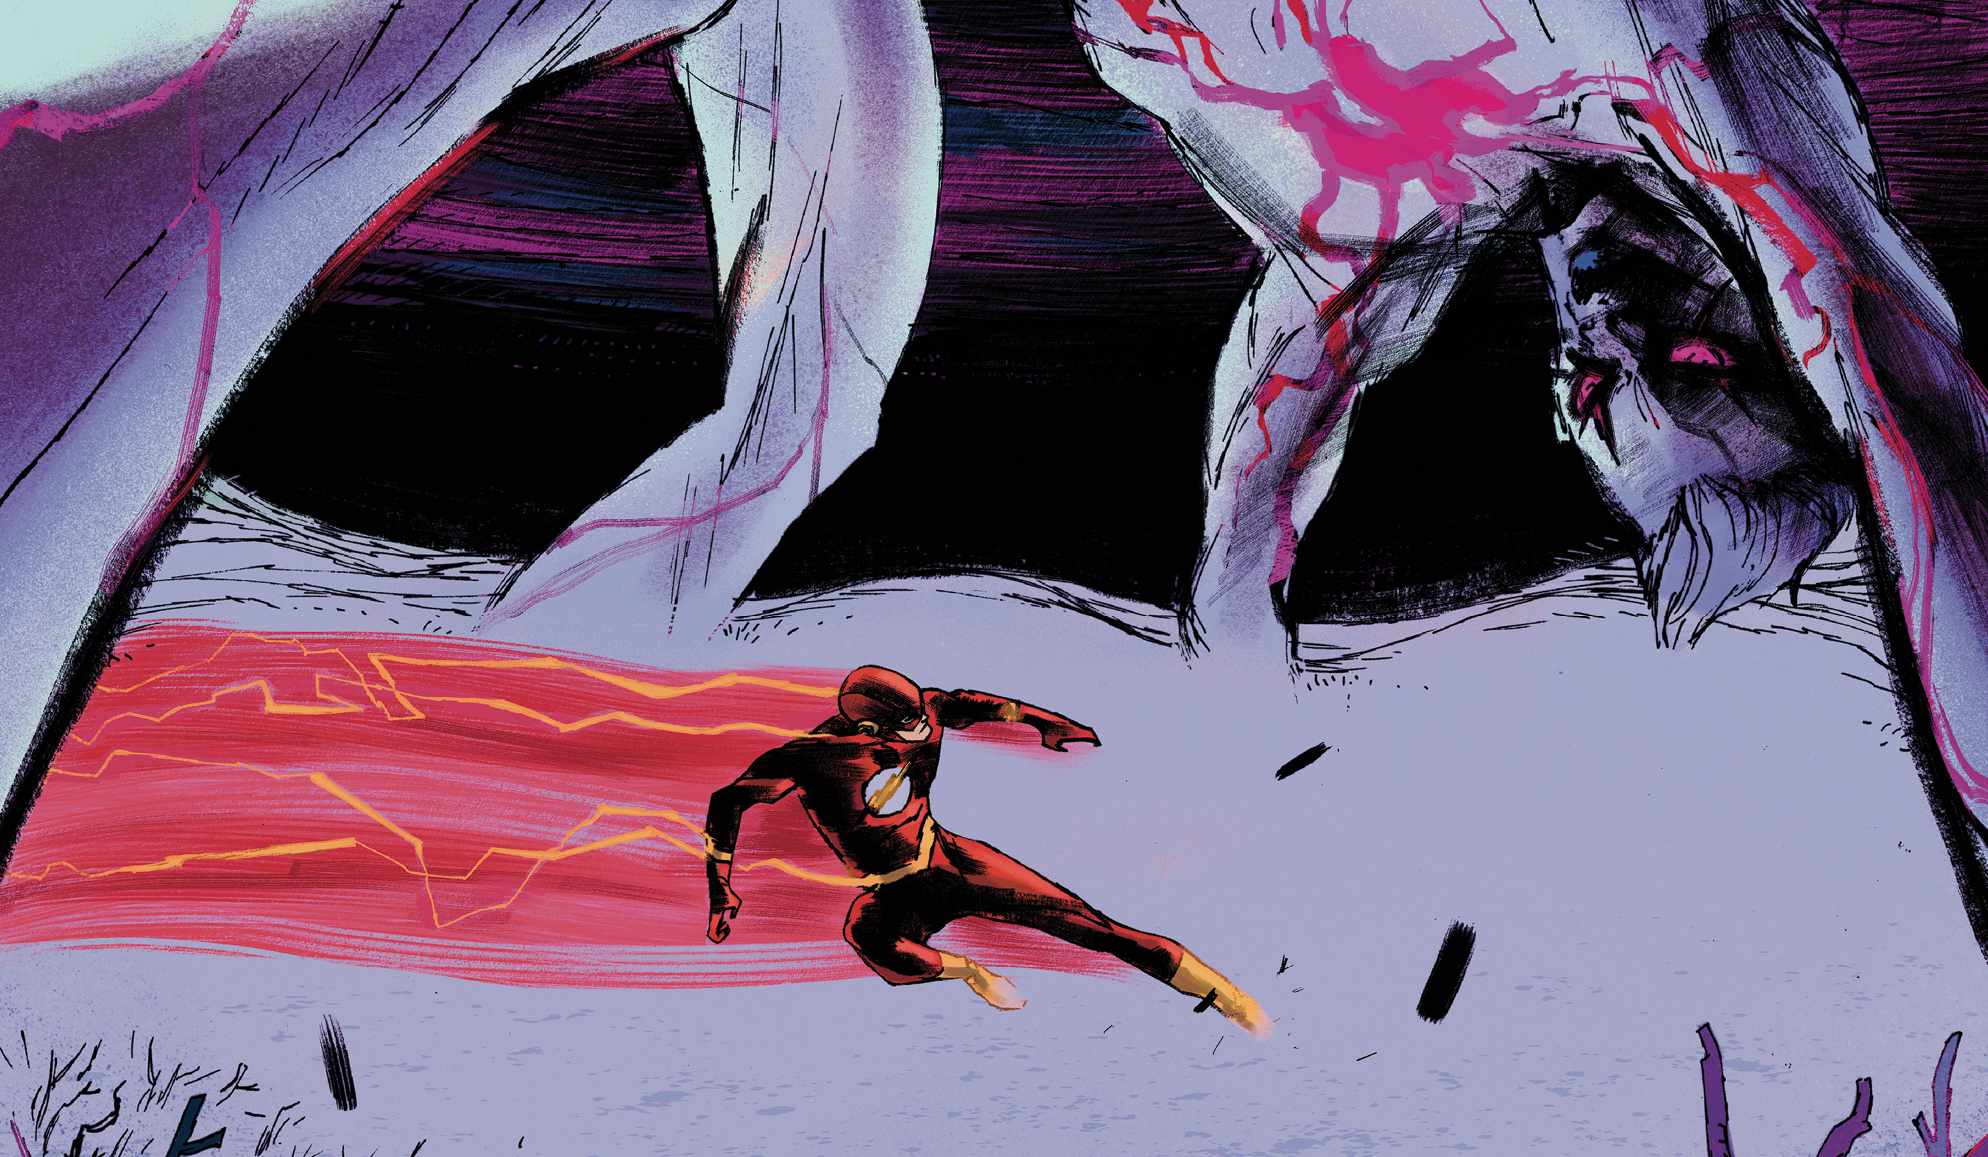 'Knight Terrors: The Flash' #2 satisfies with body horror